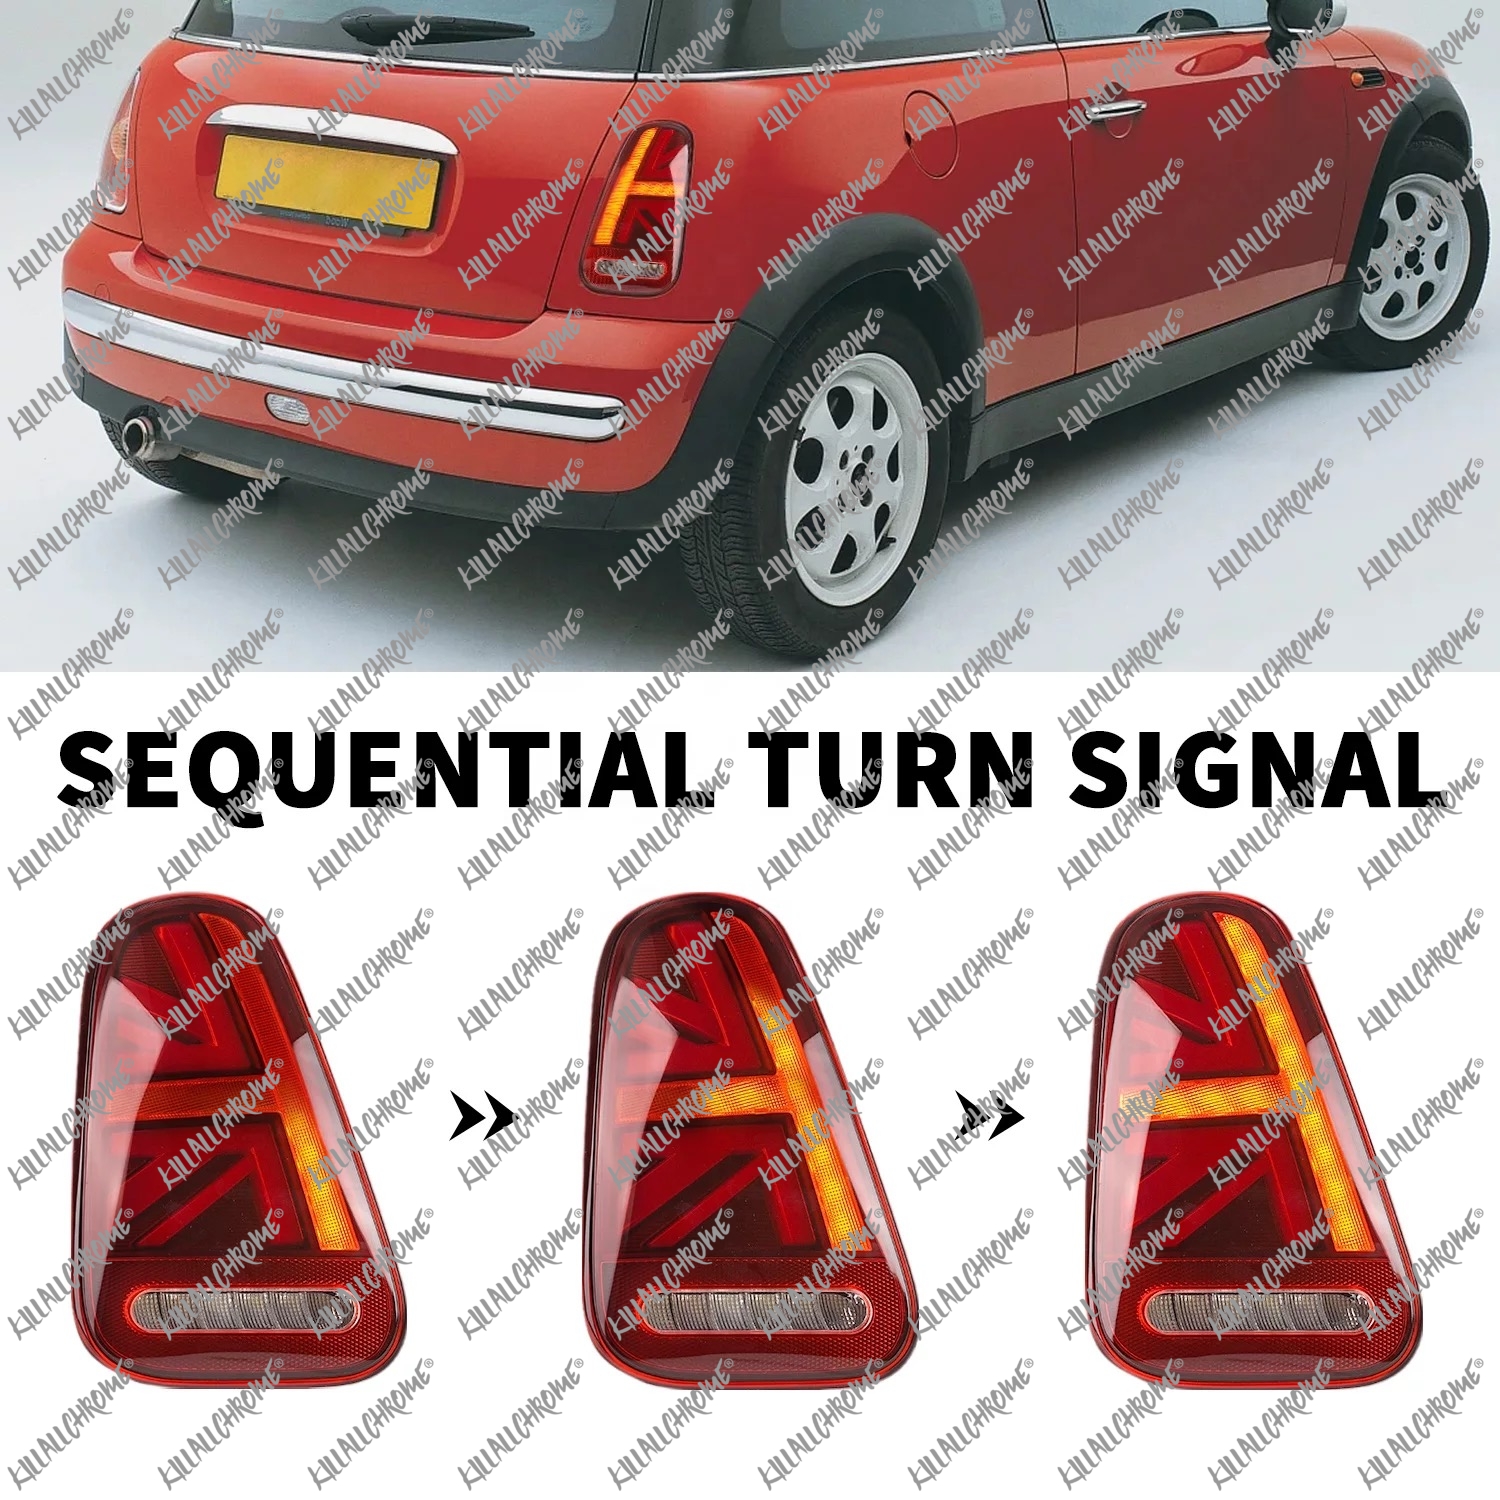 MINI 60 Years Edition: Union Jack taillights shine brightly thanks to  PLEXIGLAS® molding compounds - Röhm